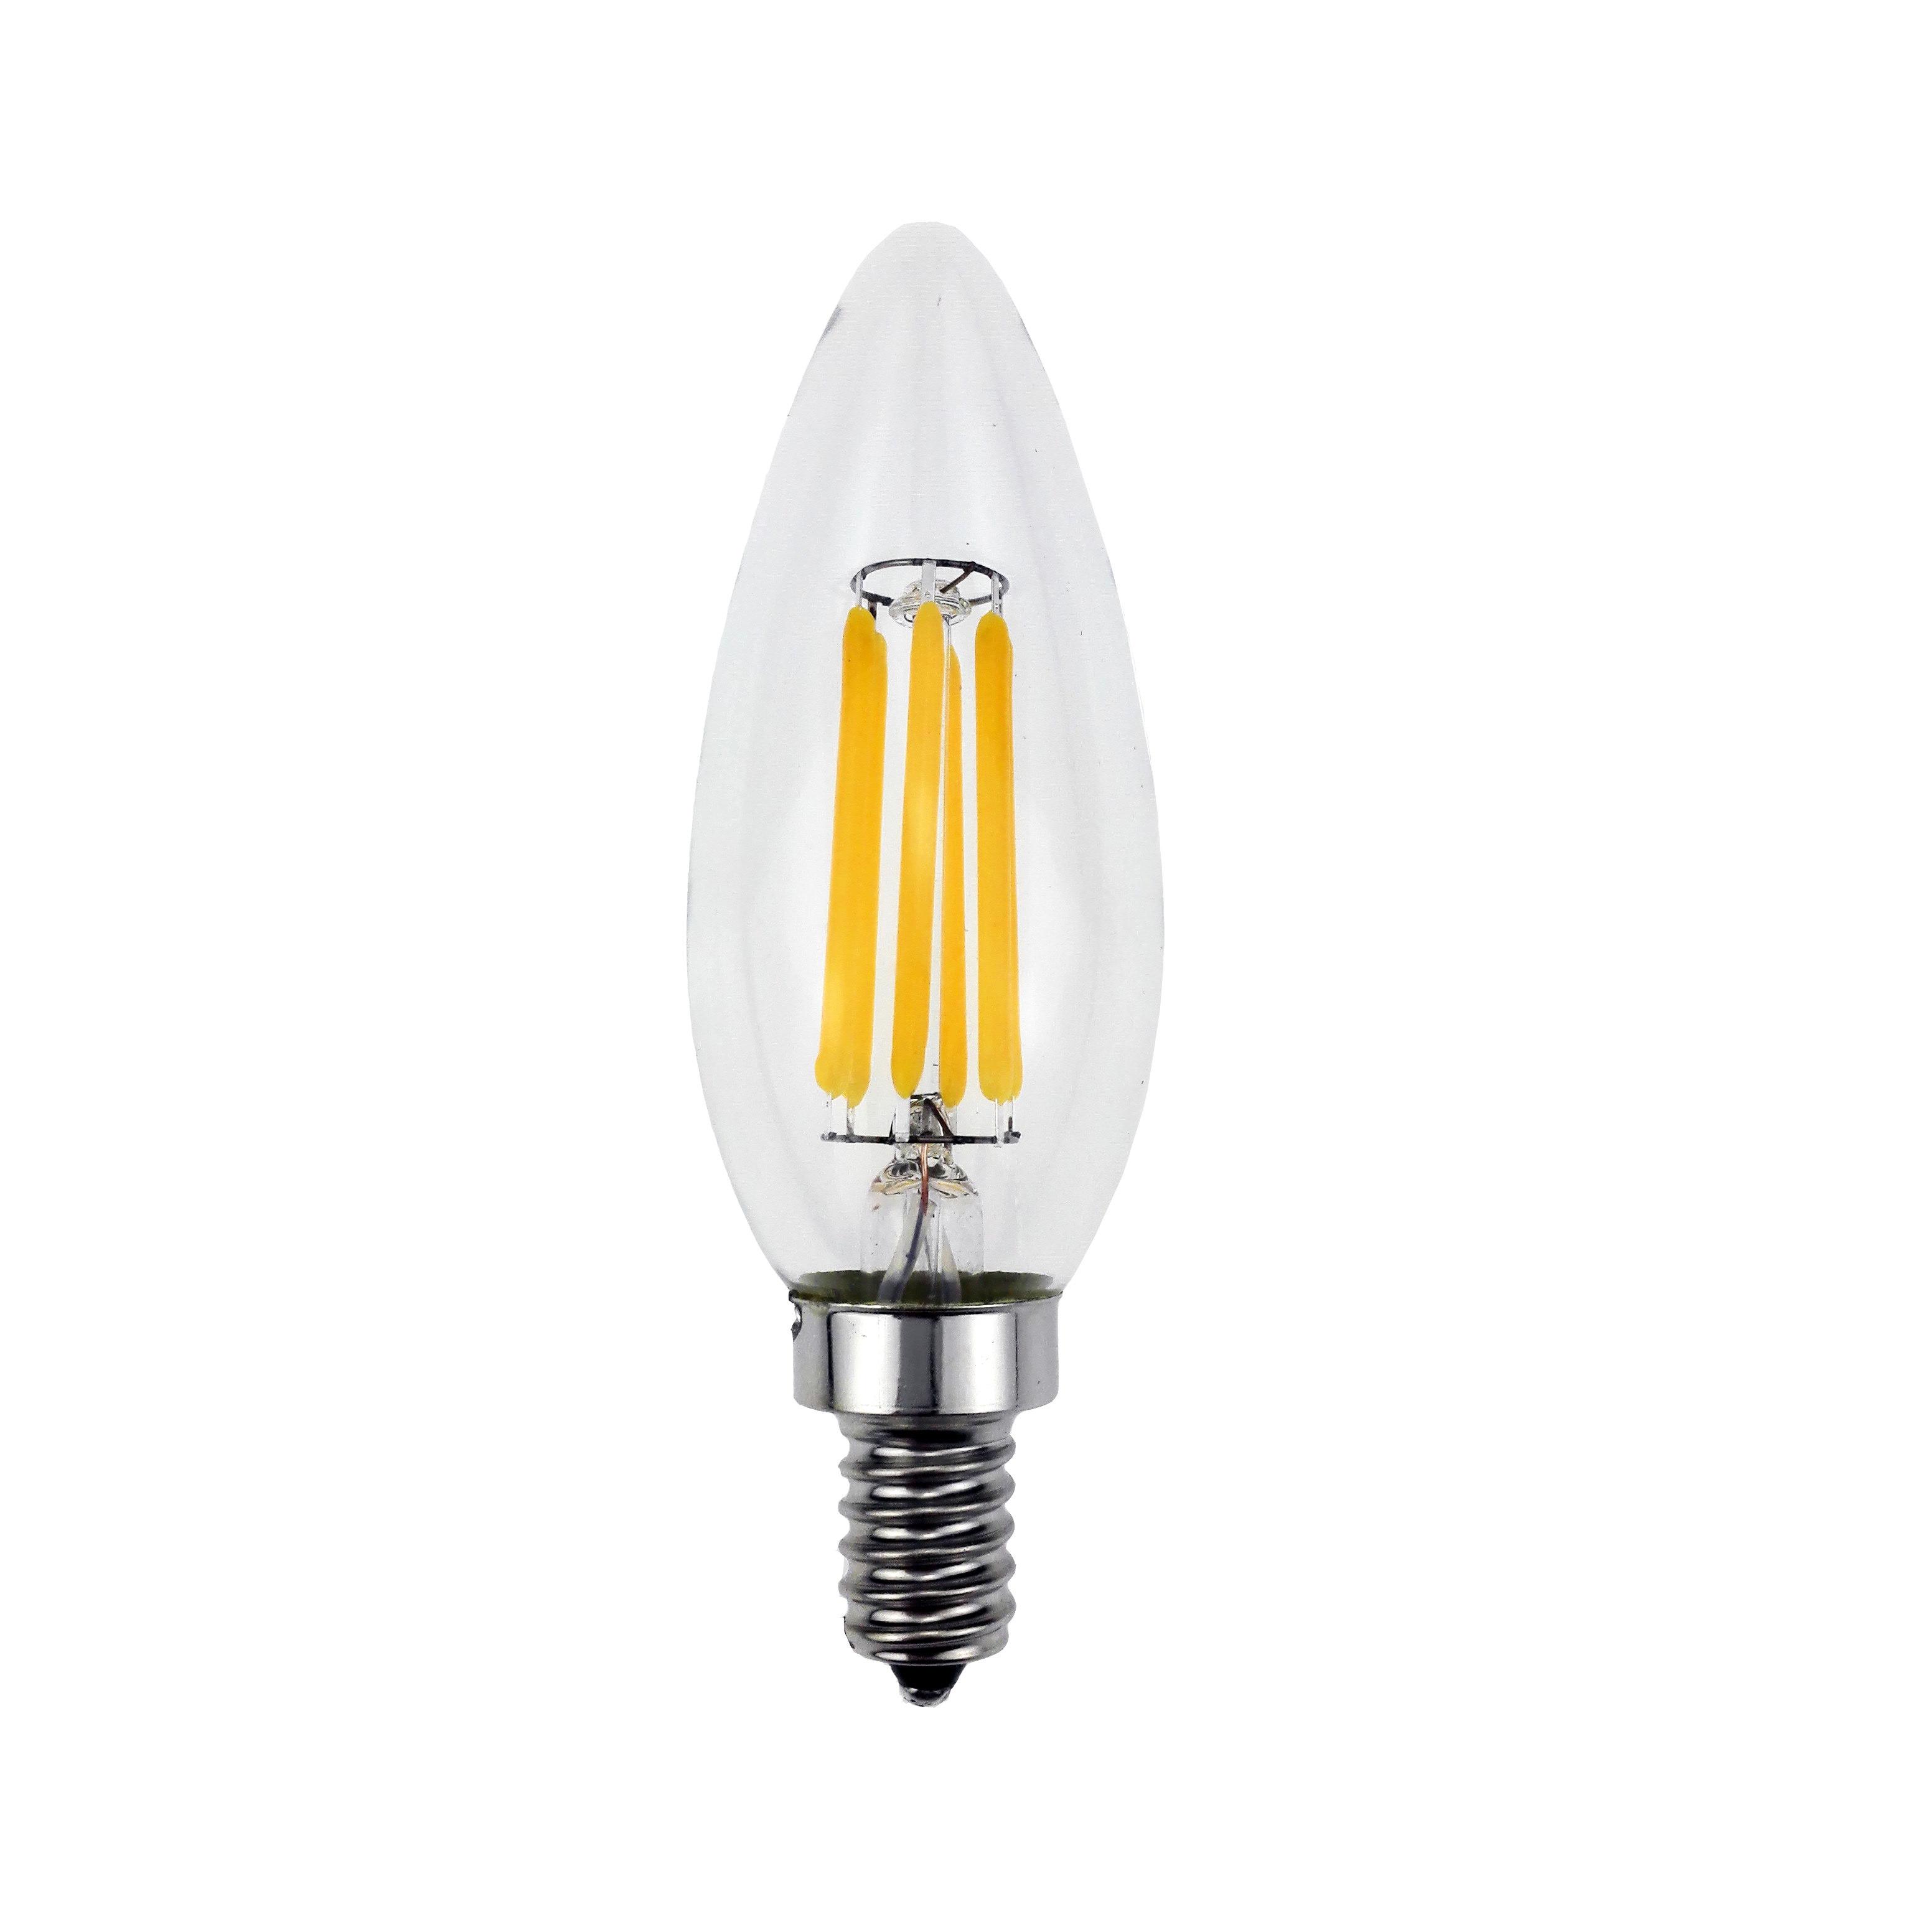 Dimmable Clear Candelabra Base 27K 1 Pack E12 60W Equivalent Sunlite 80664-SU LED Filament Chandelier Bulb with Torpedo Tip 5 Watts Warm White 600 Lumens 